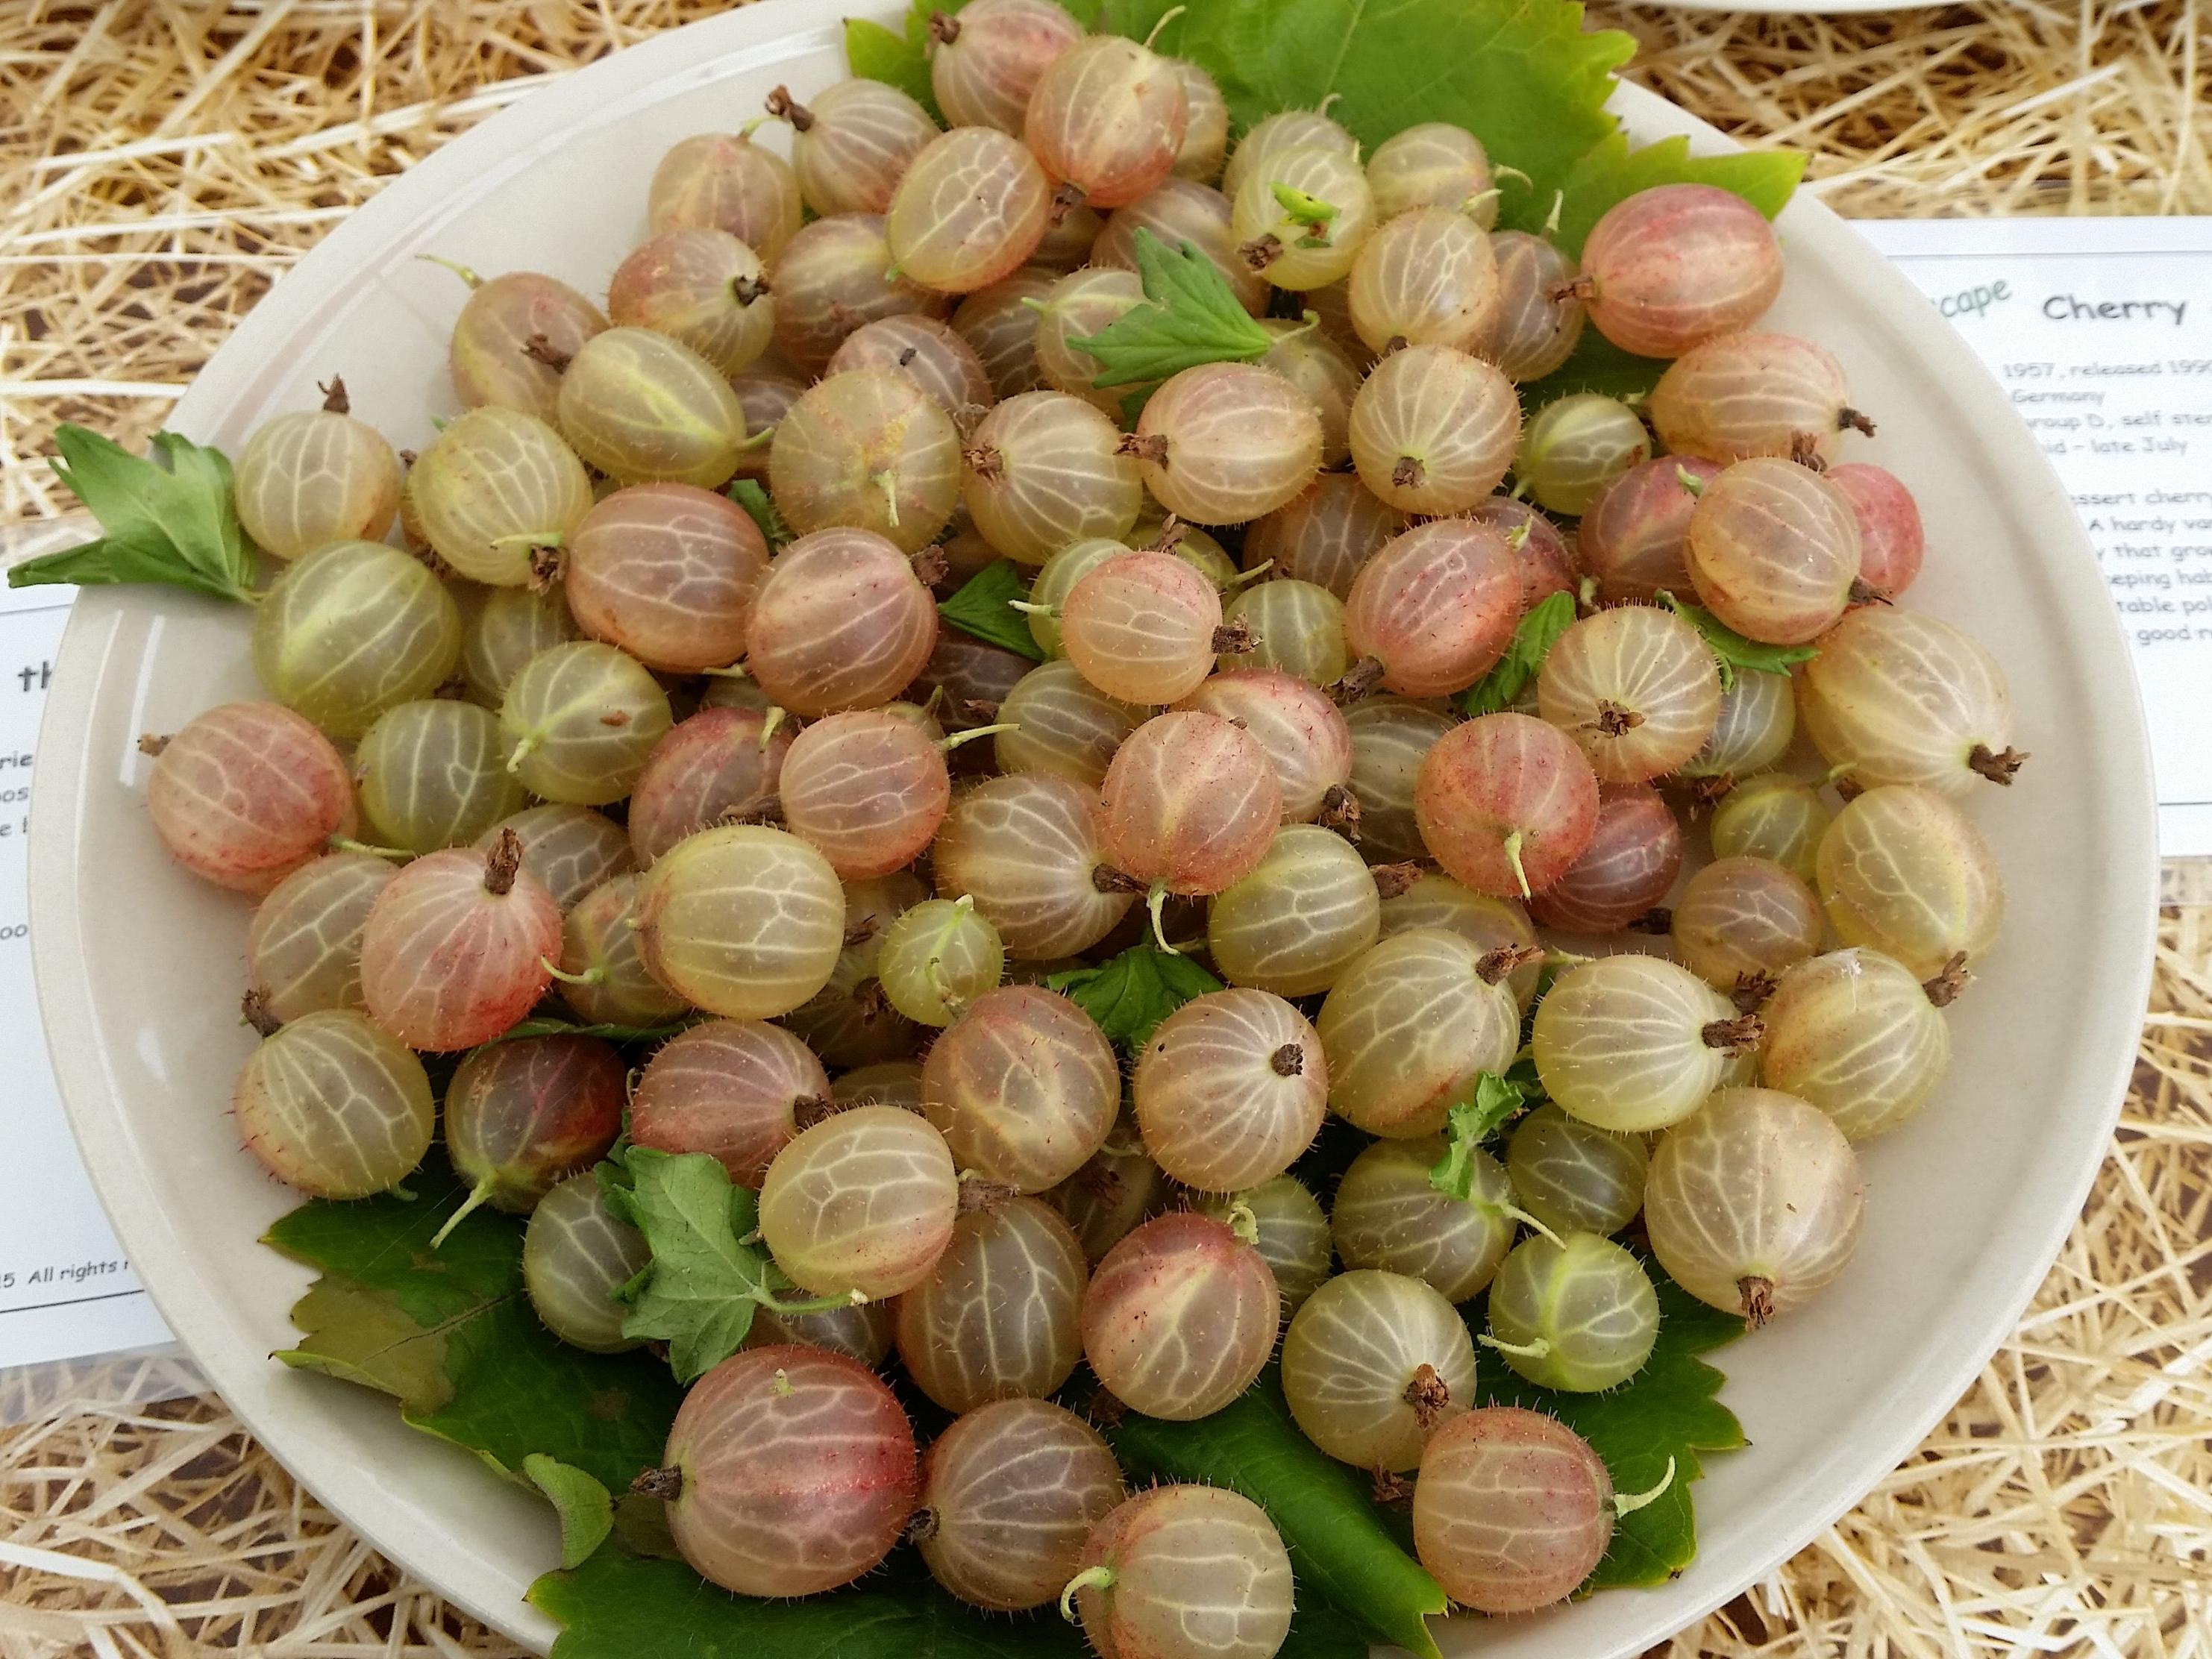 Gooseberries not have to be tart, these are sweet and can be enjoyed without cooking